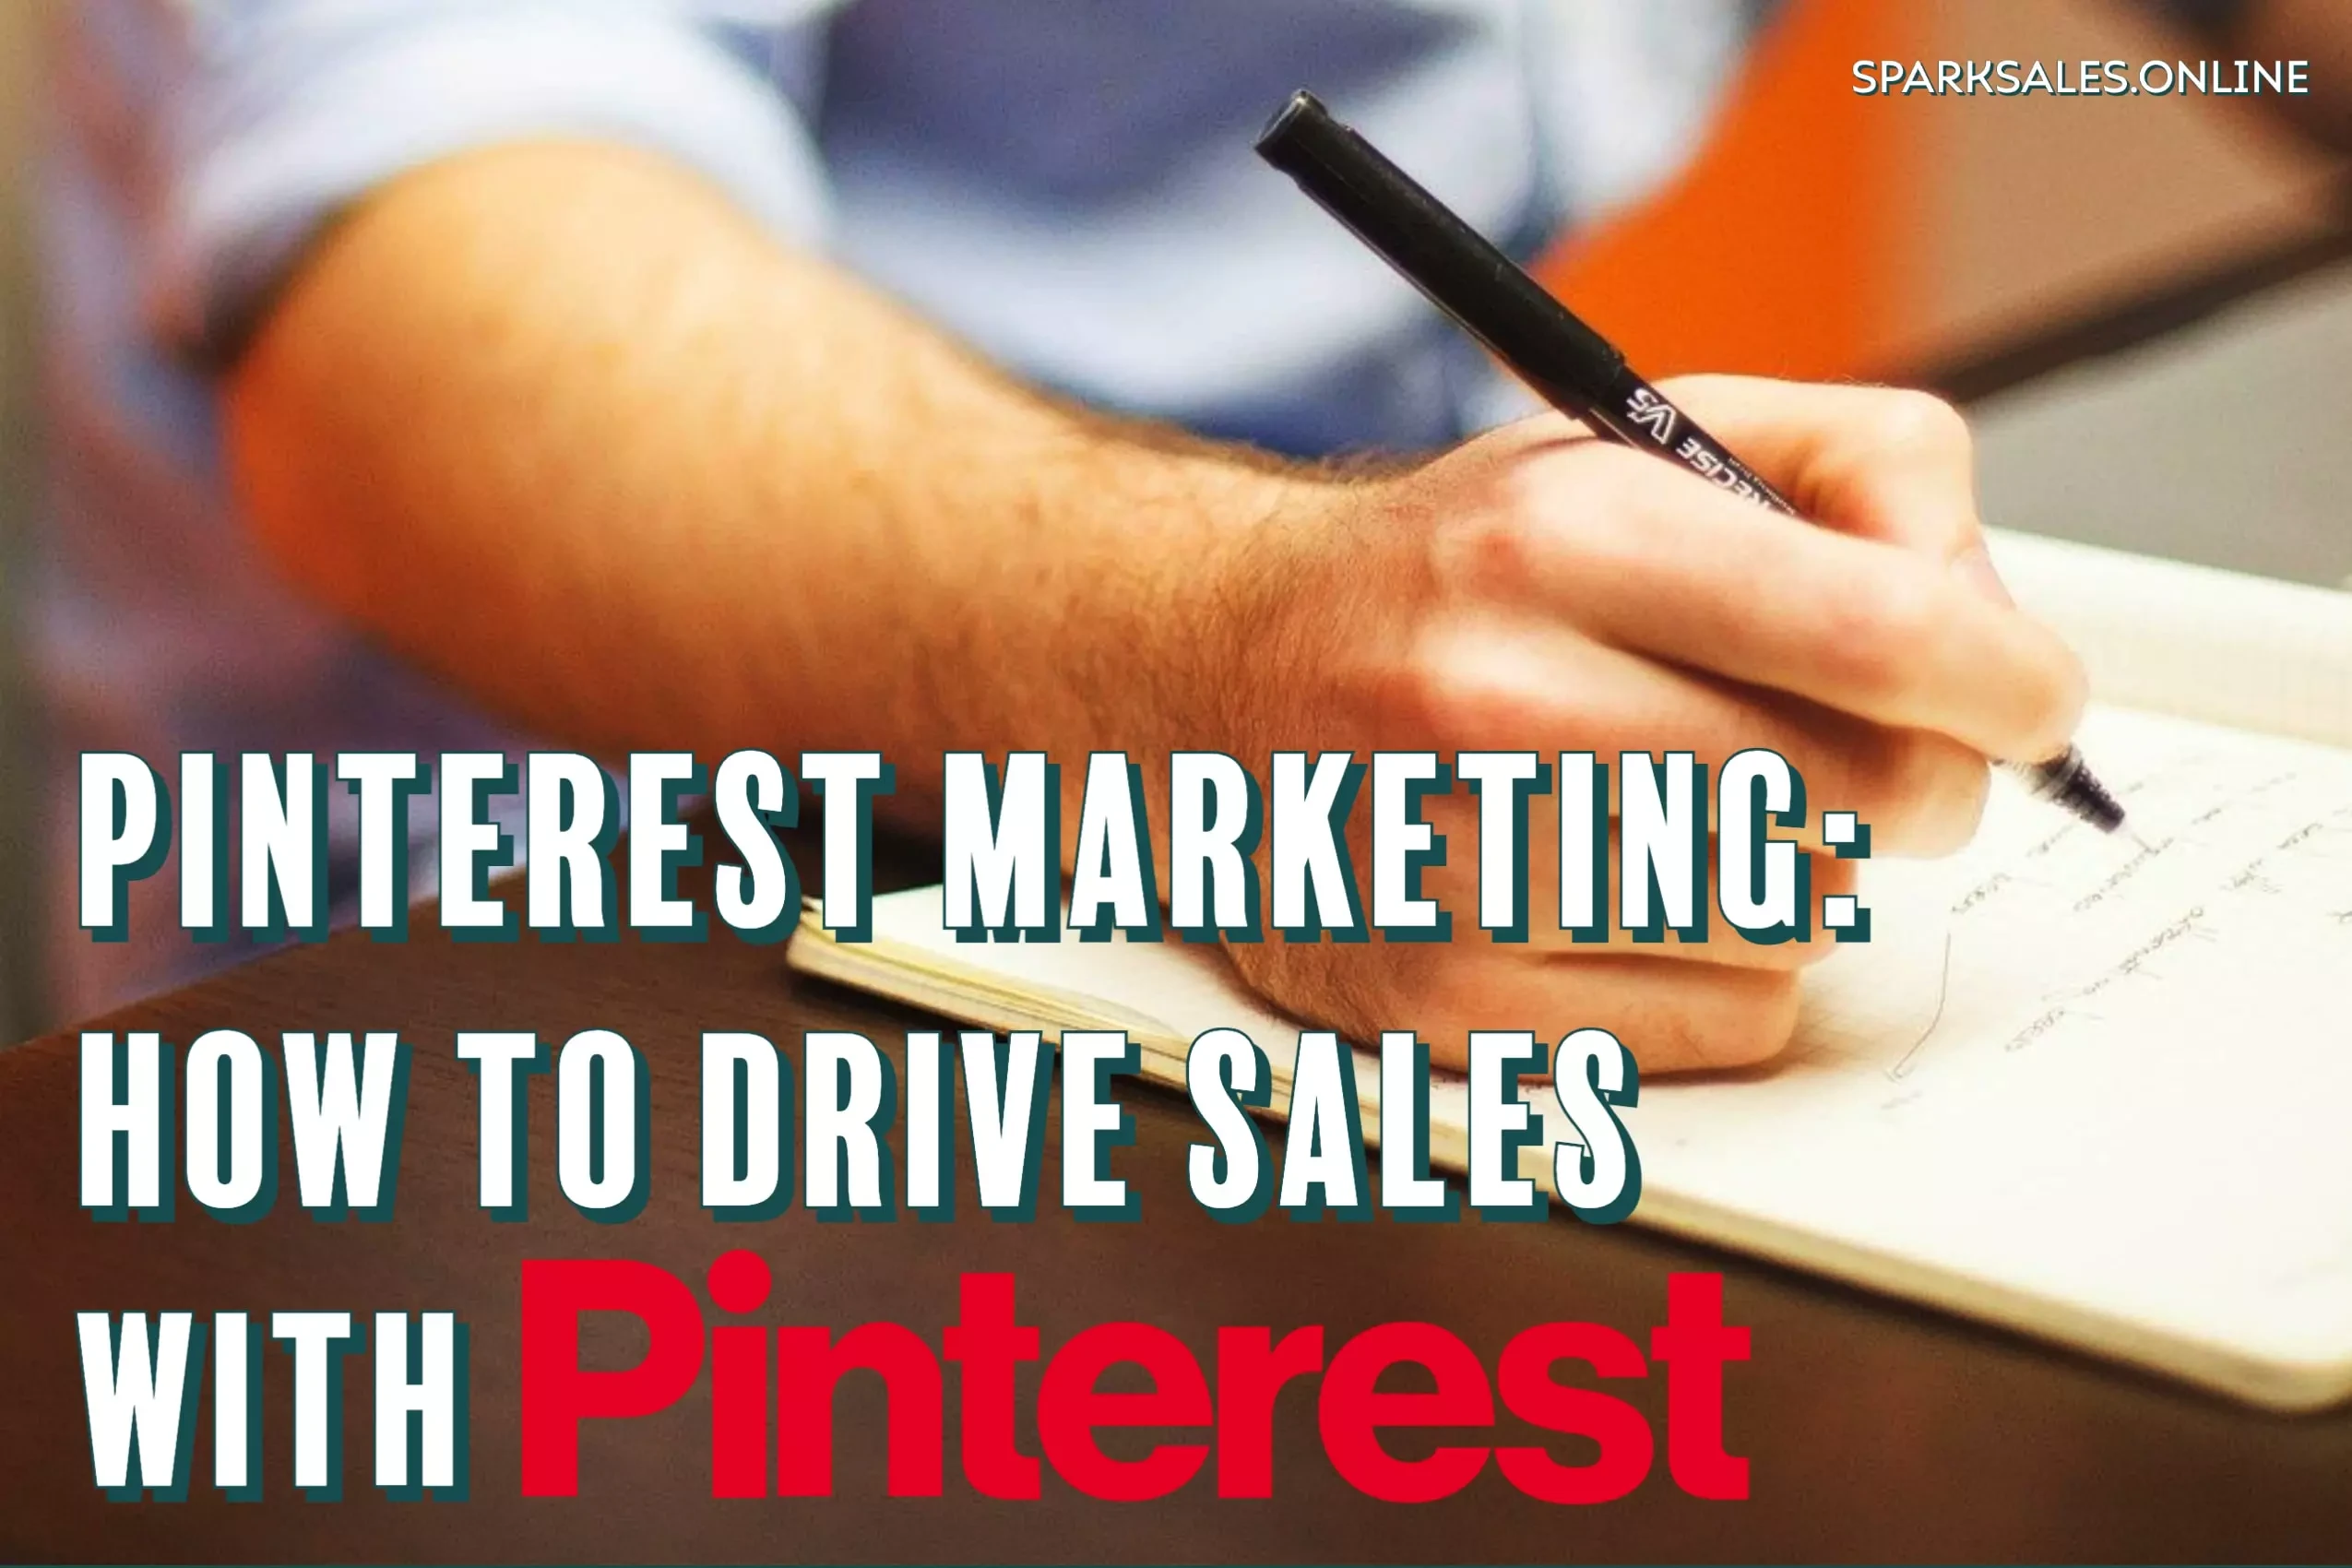 Pinterest Marketing: How To Drive Sales With Pinterest